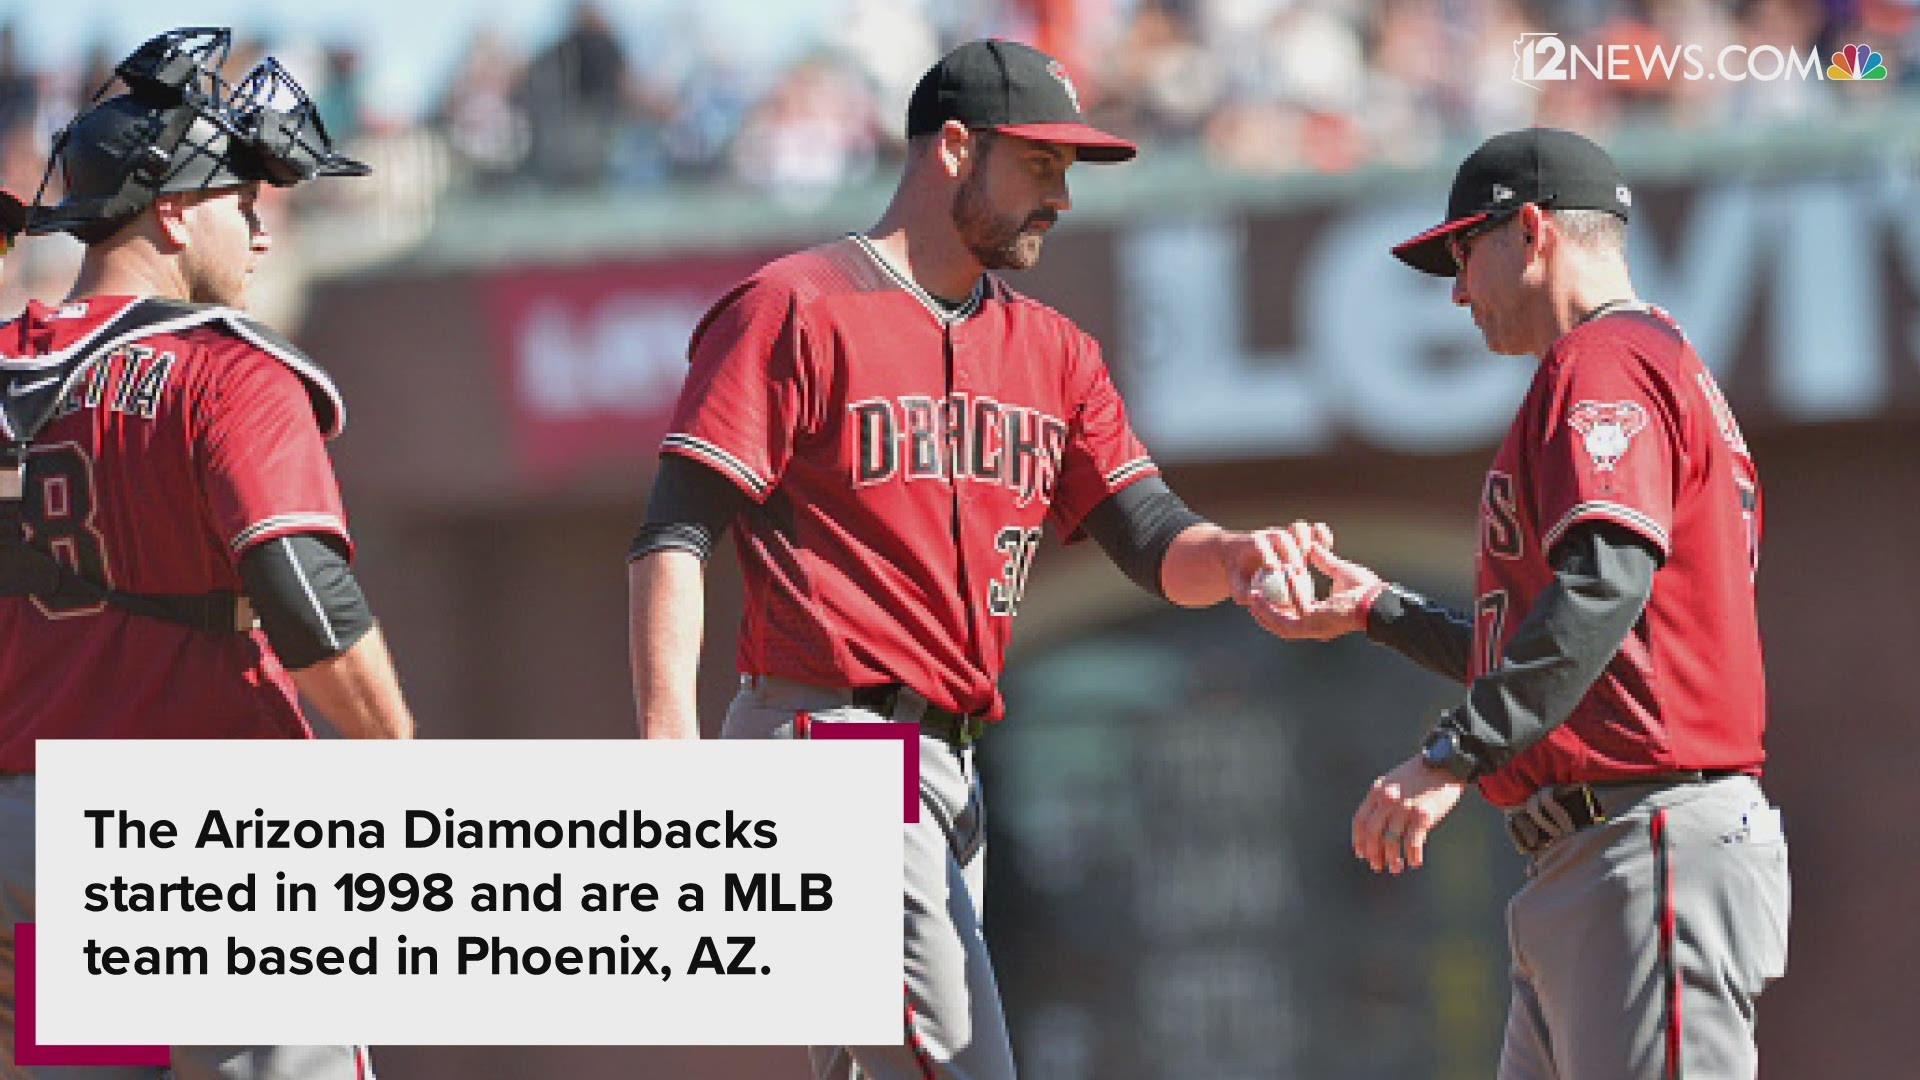 Here are some quick facts about the Arizona Diamondbacks if you plan to enjoy a baseball game this season.